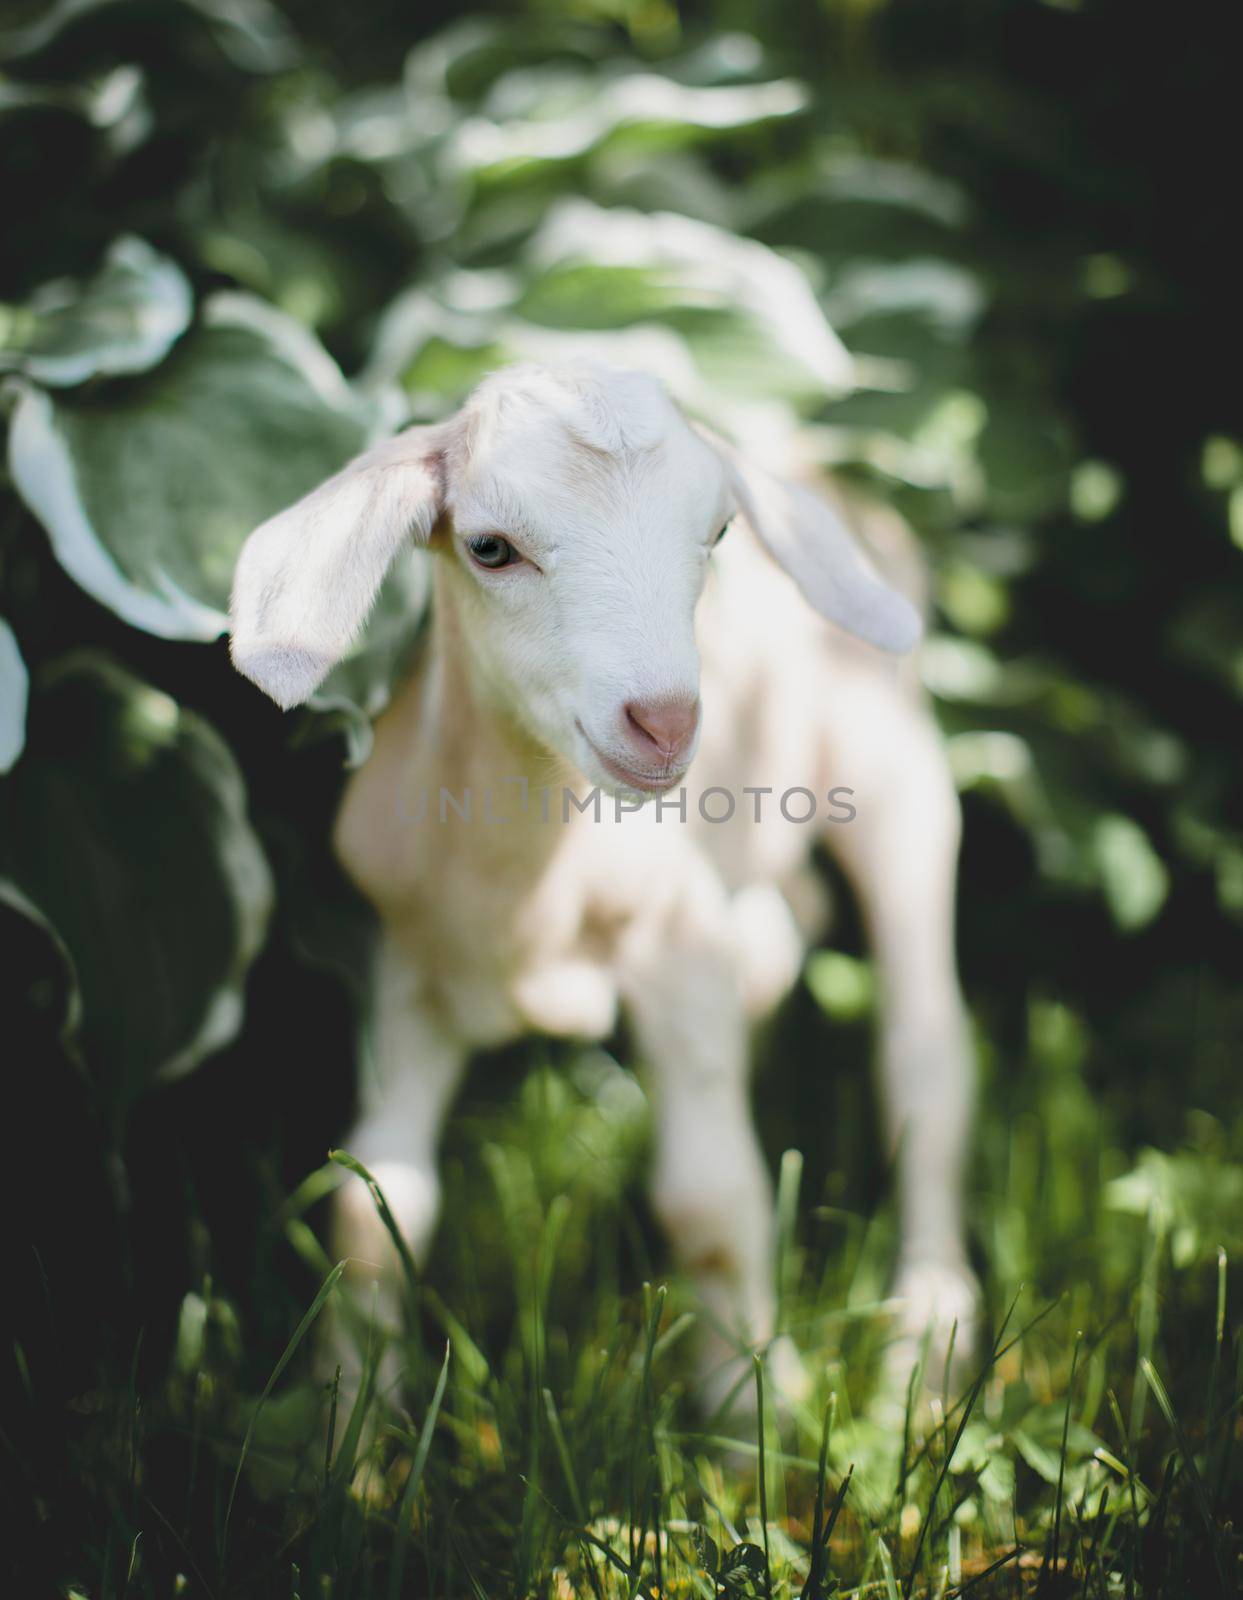 Cute young white goatling in a garden by RosaJay